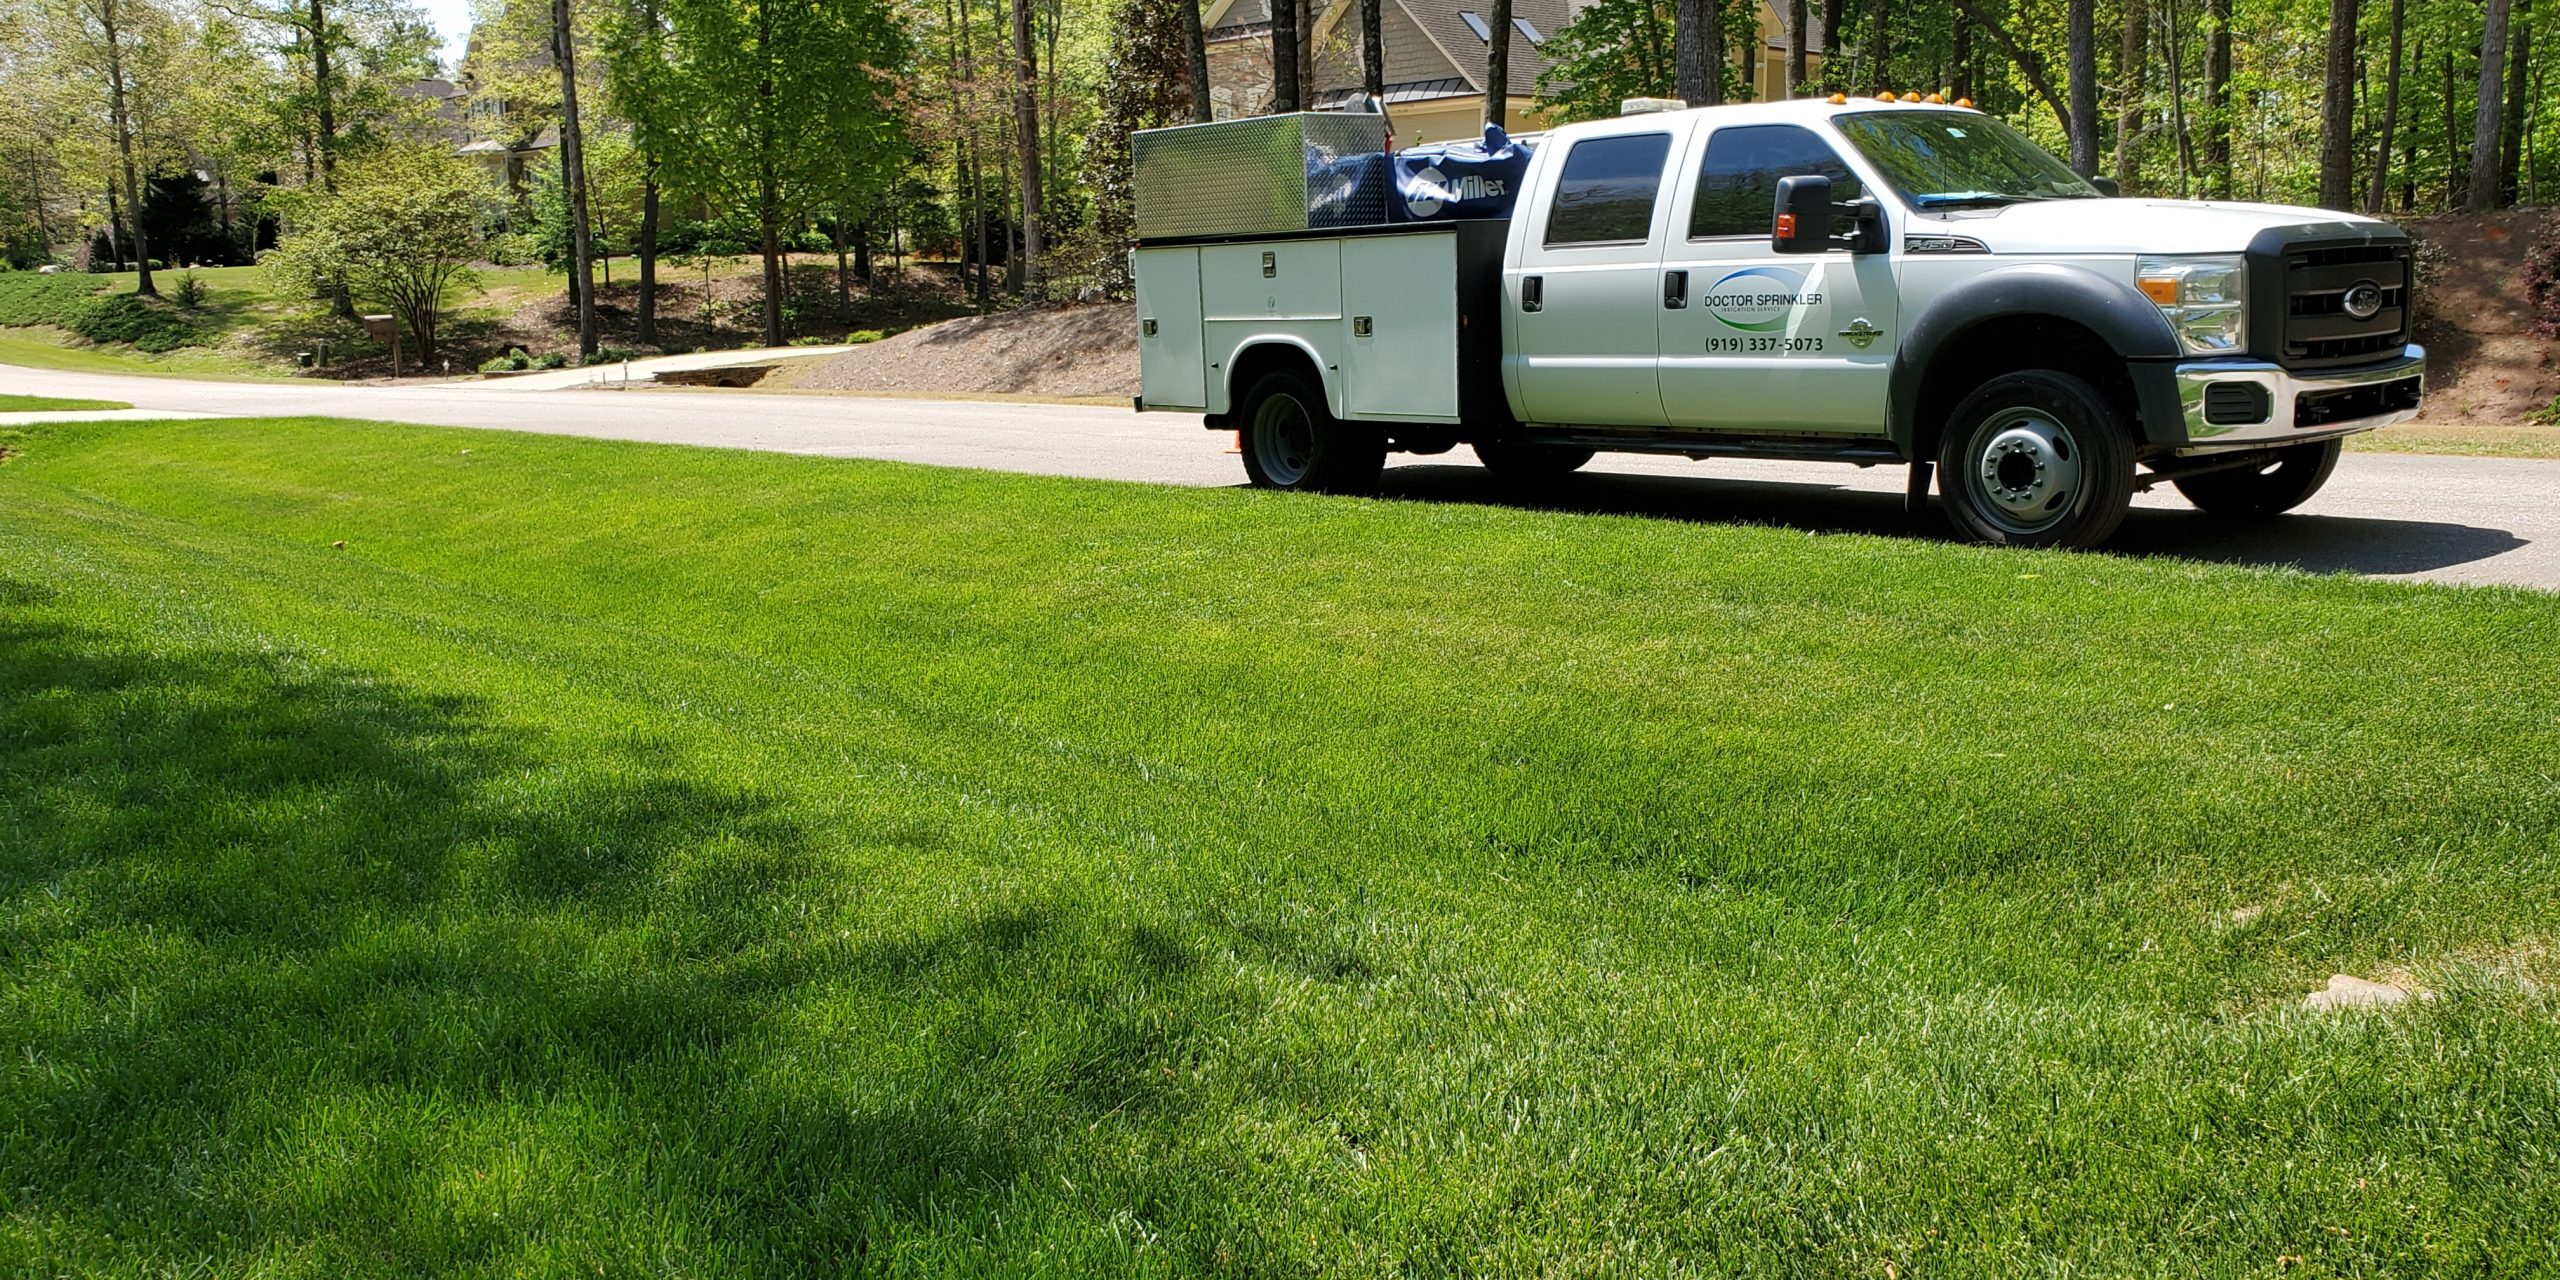 SPRINKLER & IRRIGATION SERVICE SPECIALISTS Over 30 Years Of Irrigation Experience Sprinkler & Irrigation Service Specialists Over 30 Years of Irrigation Experience Serving Raleigh, Wake Forest, Cary & Surrounding Cities Licensed, Certified & Insured